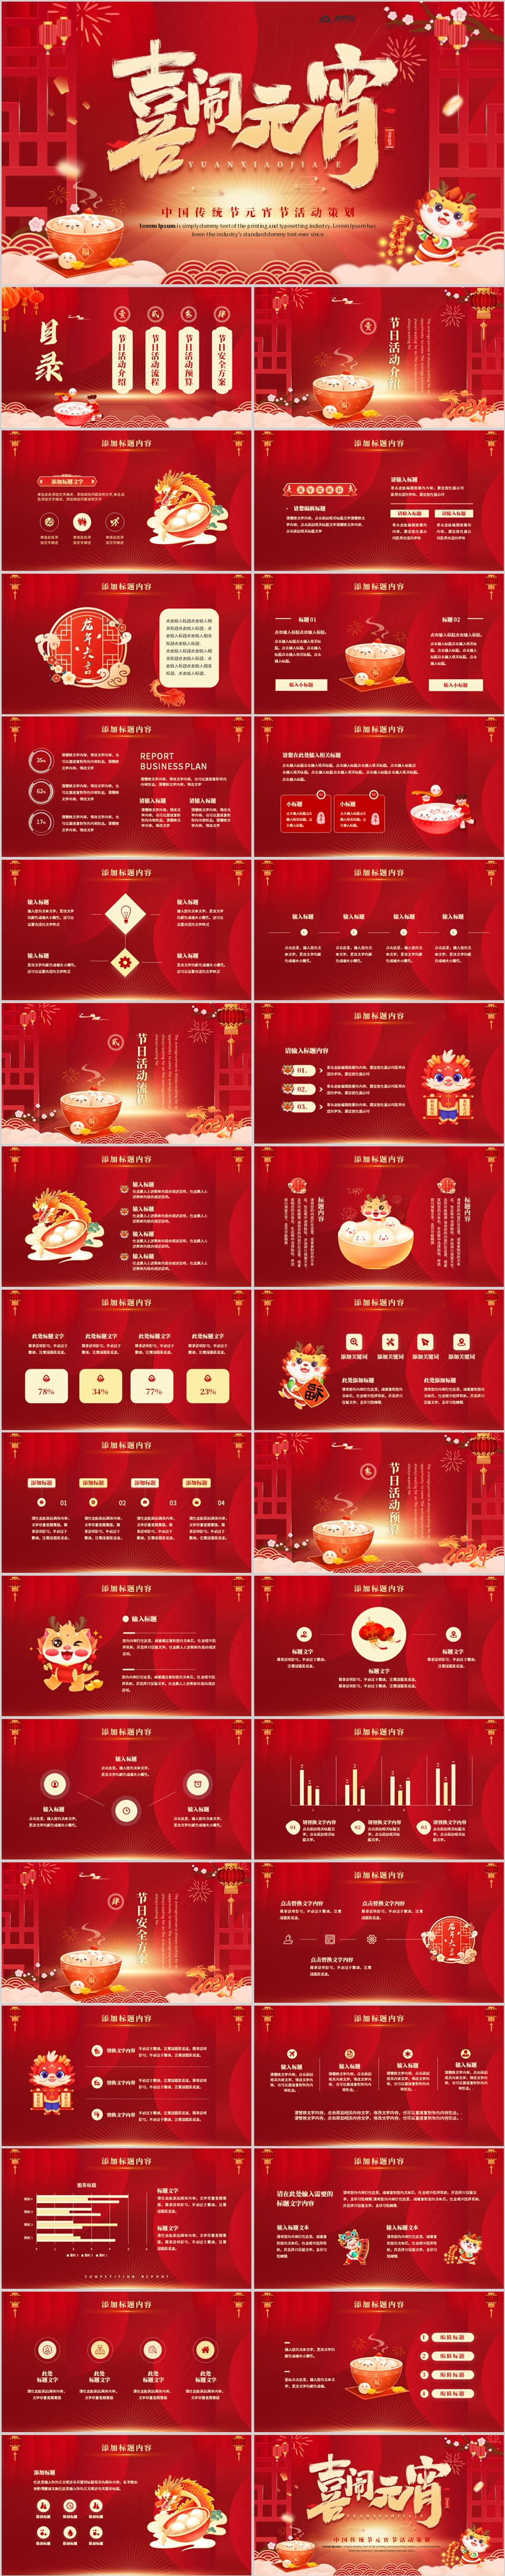  PPT template for Red Chinese Traditional Festival Lantern Festival activity planning